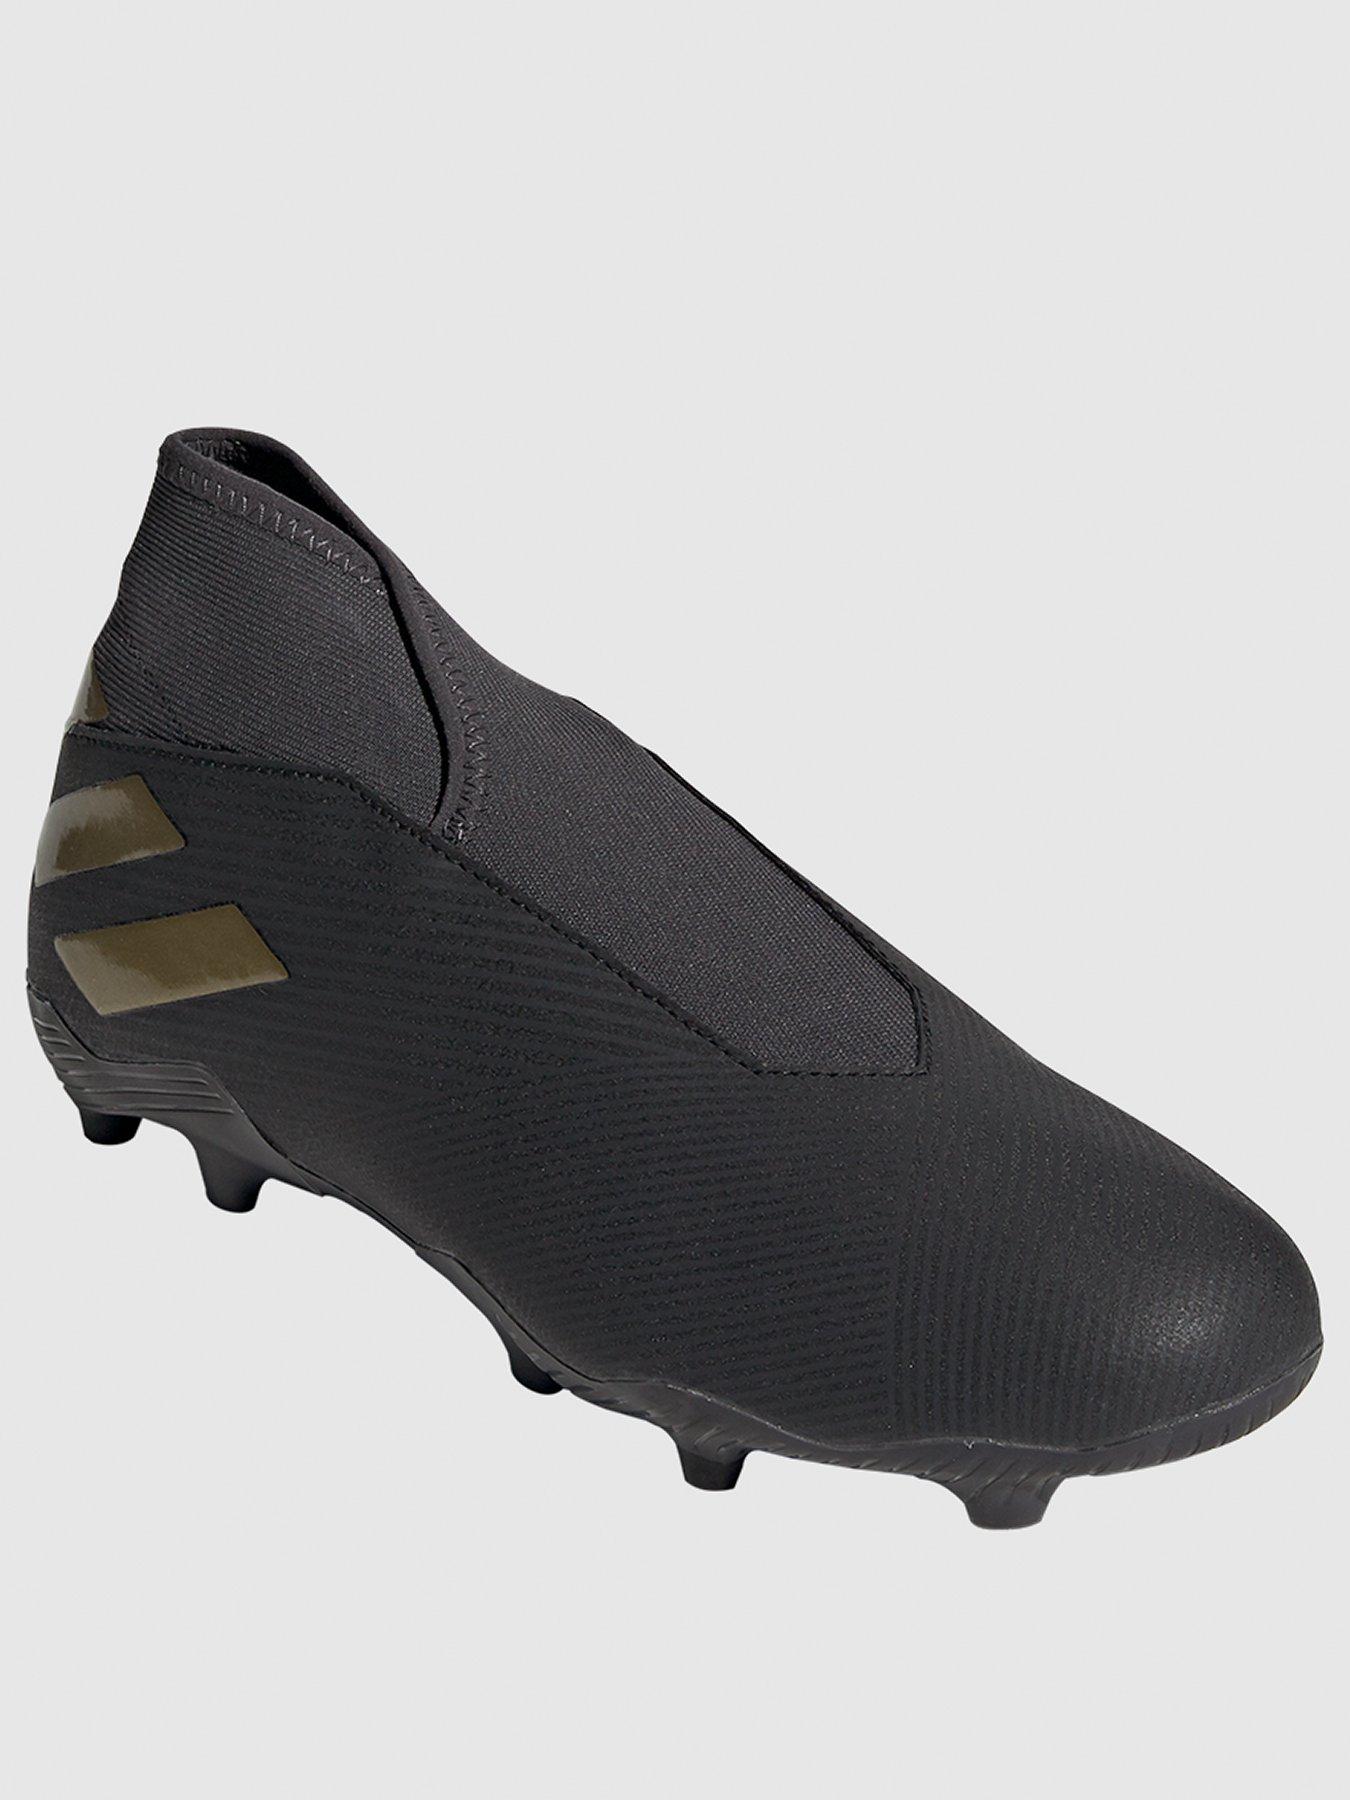 laceless football boots